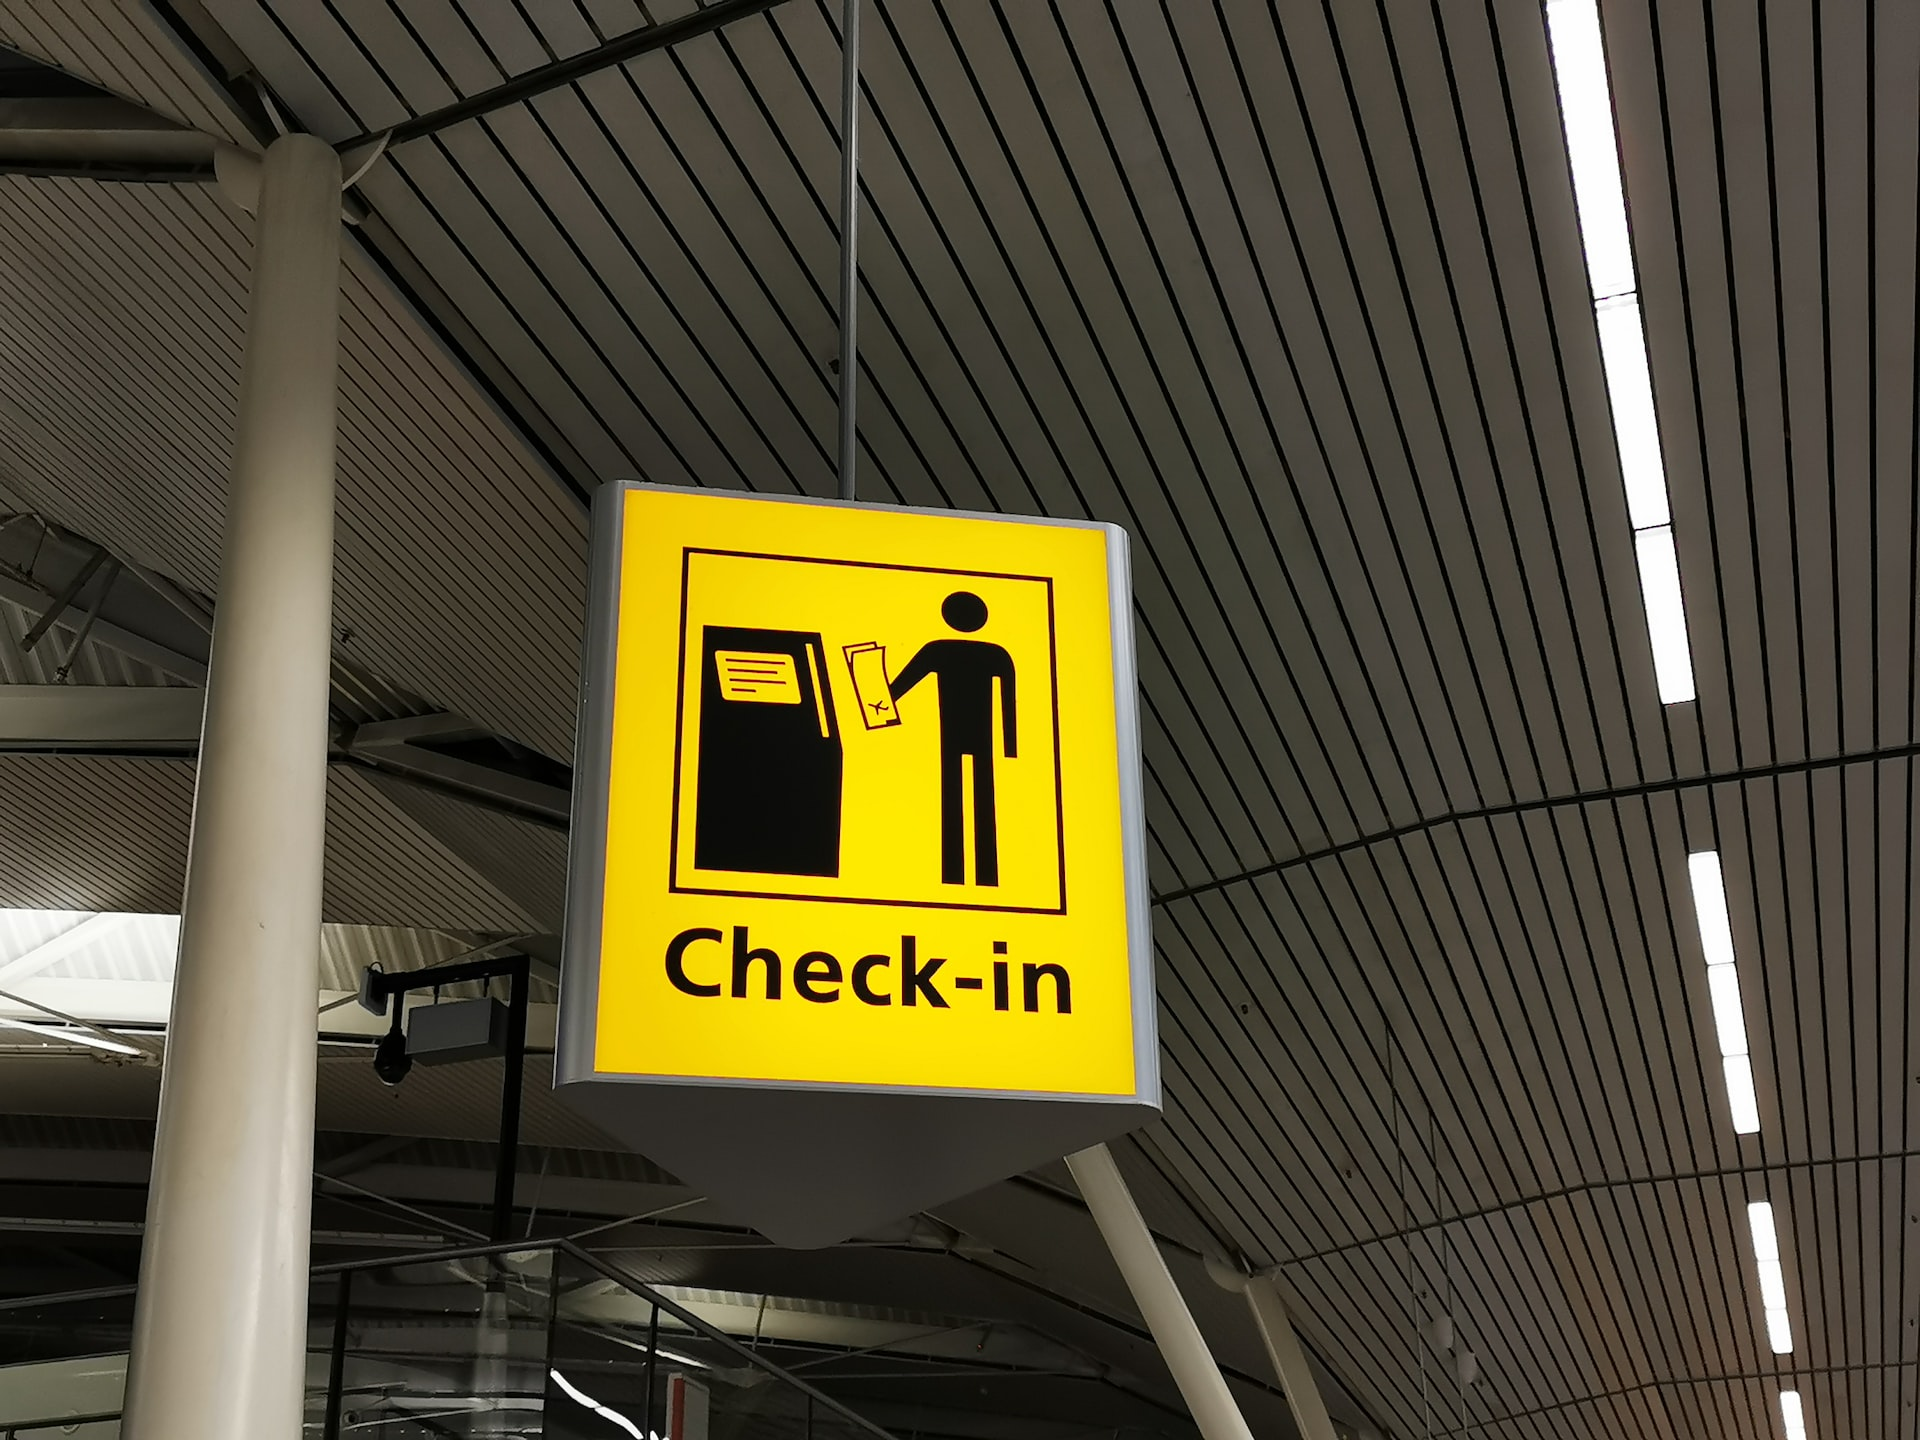 Airport check-in desk sign.